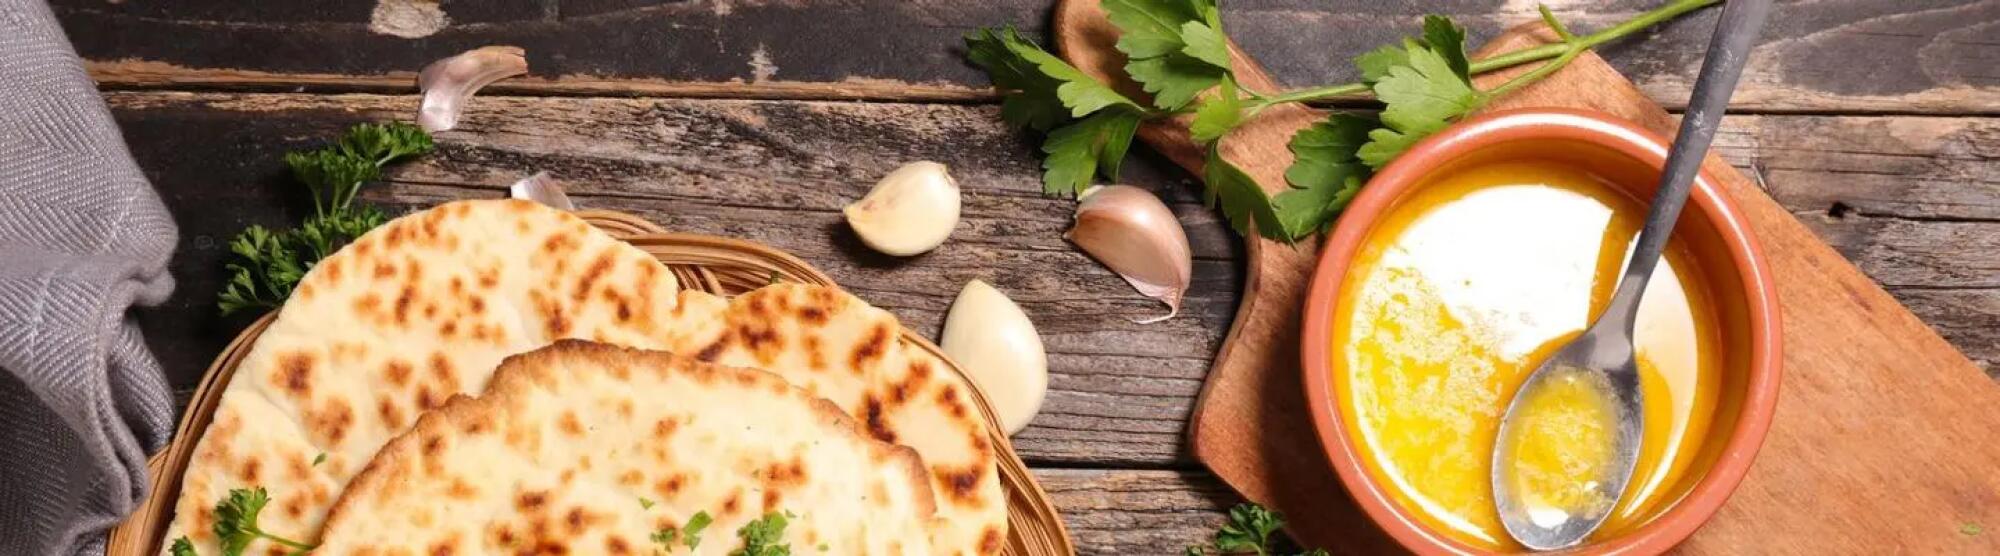 Recette : Naan au fromage au Thermomix